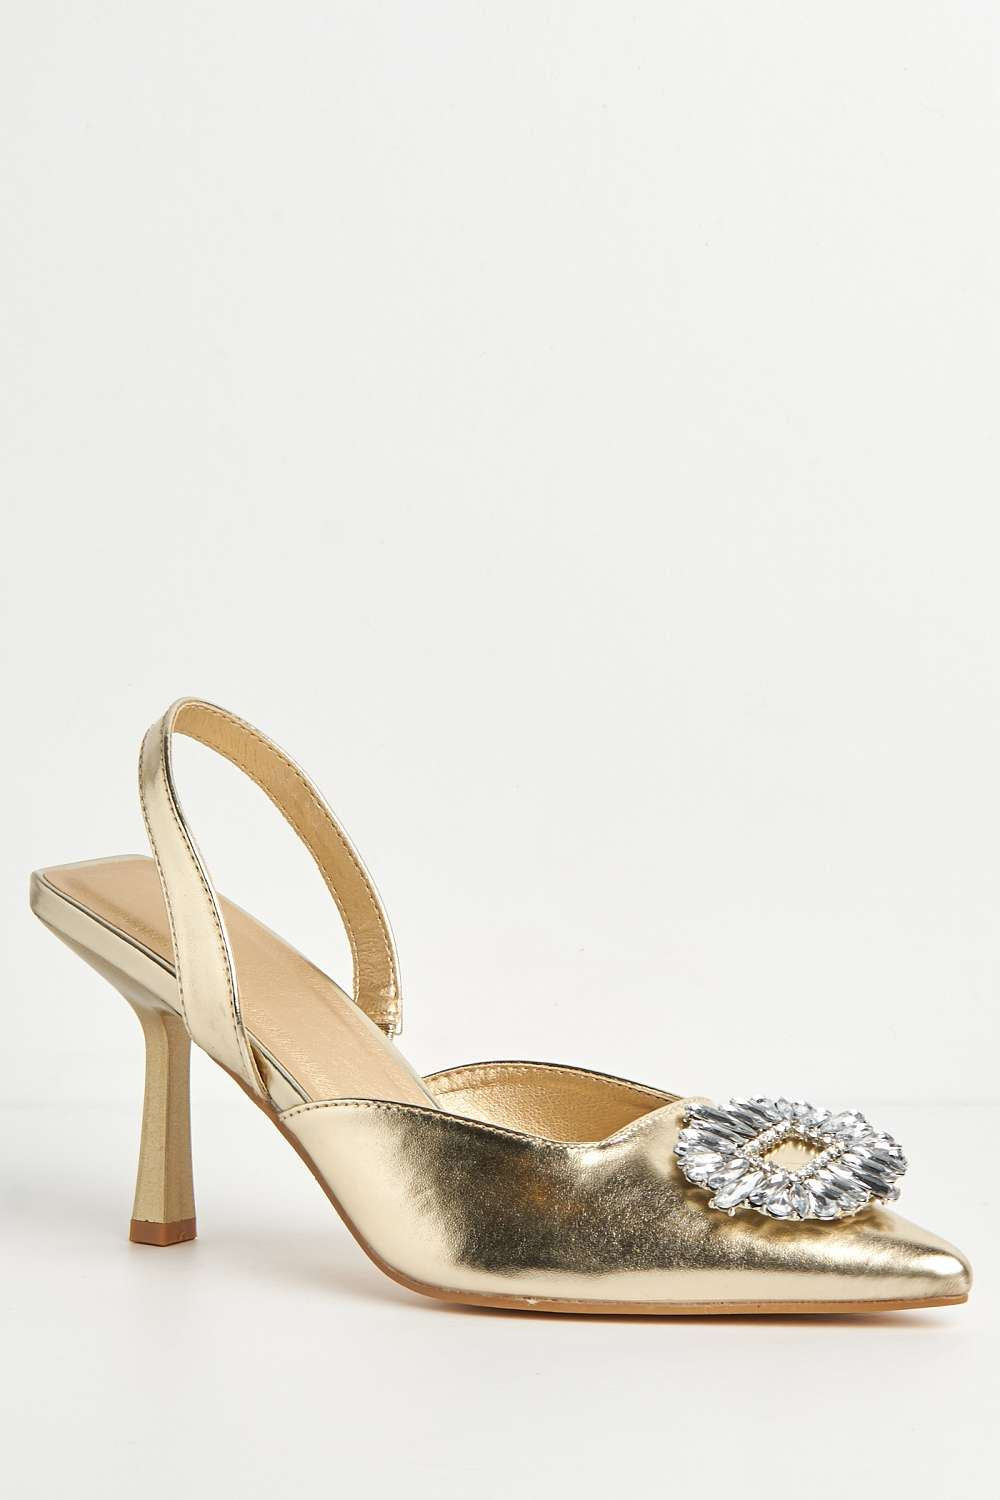 Miss Diva Amira Diamante Brooch Sling Back Court Shoes in Gold